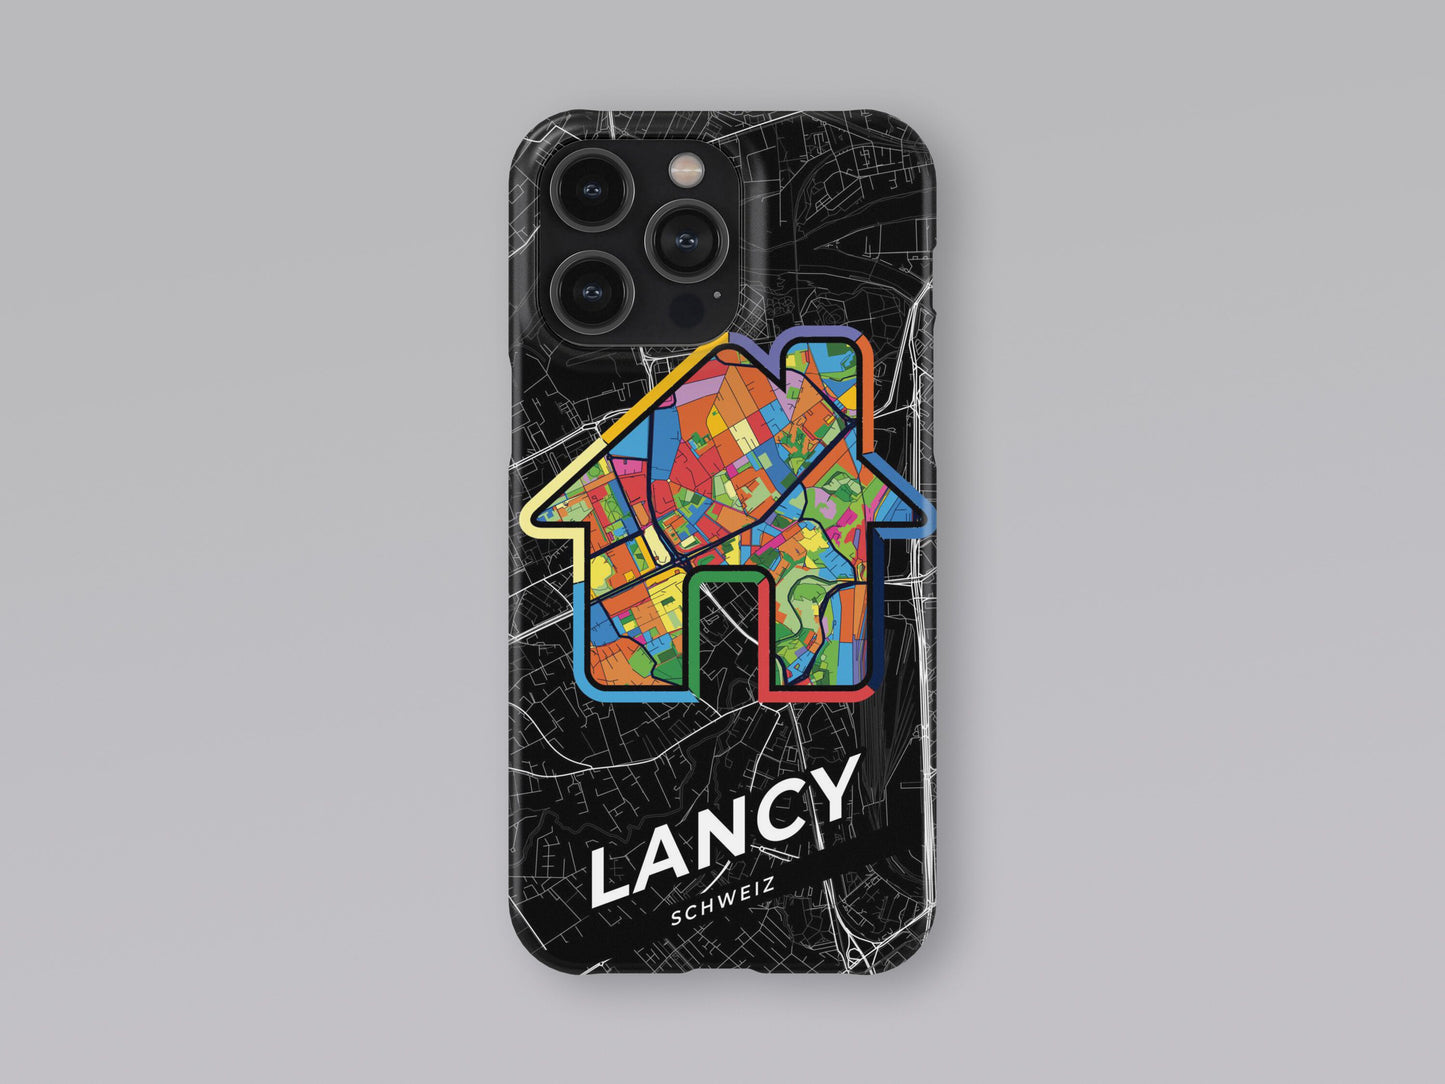 Lancy Switzerland slim phone case with colorful icon. Birthday, wedding or housewarming gift. Couple match cases. 3